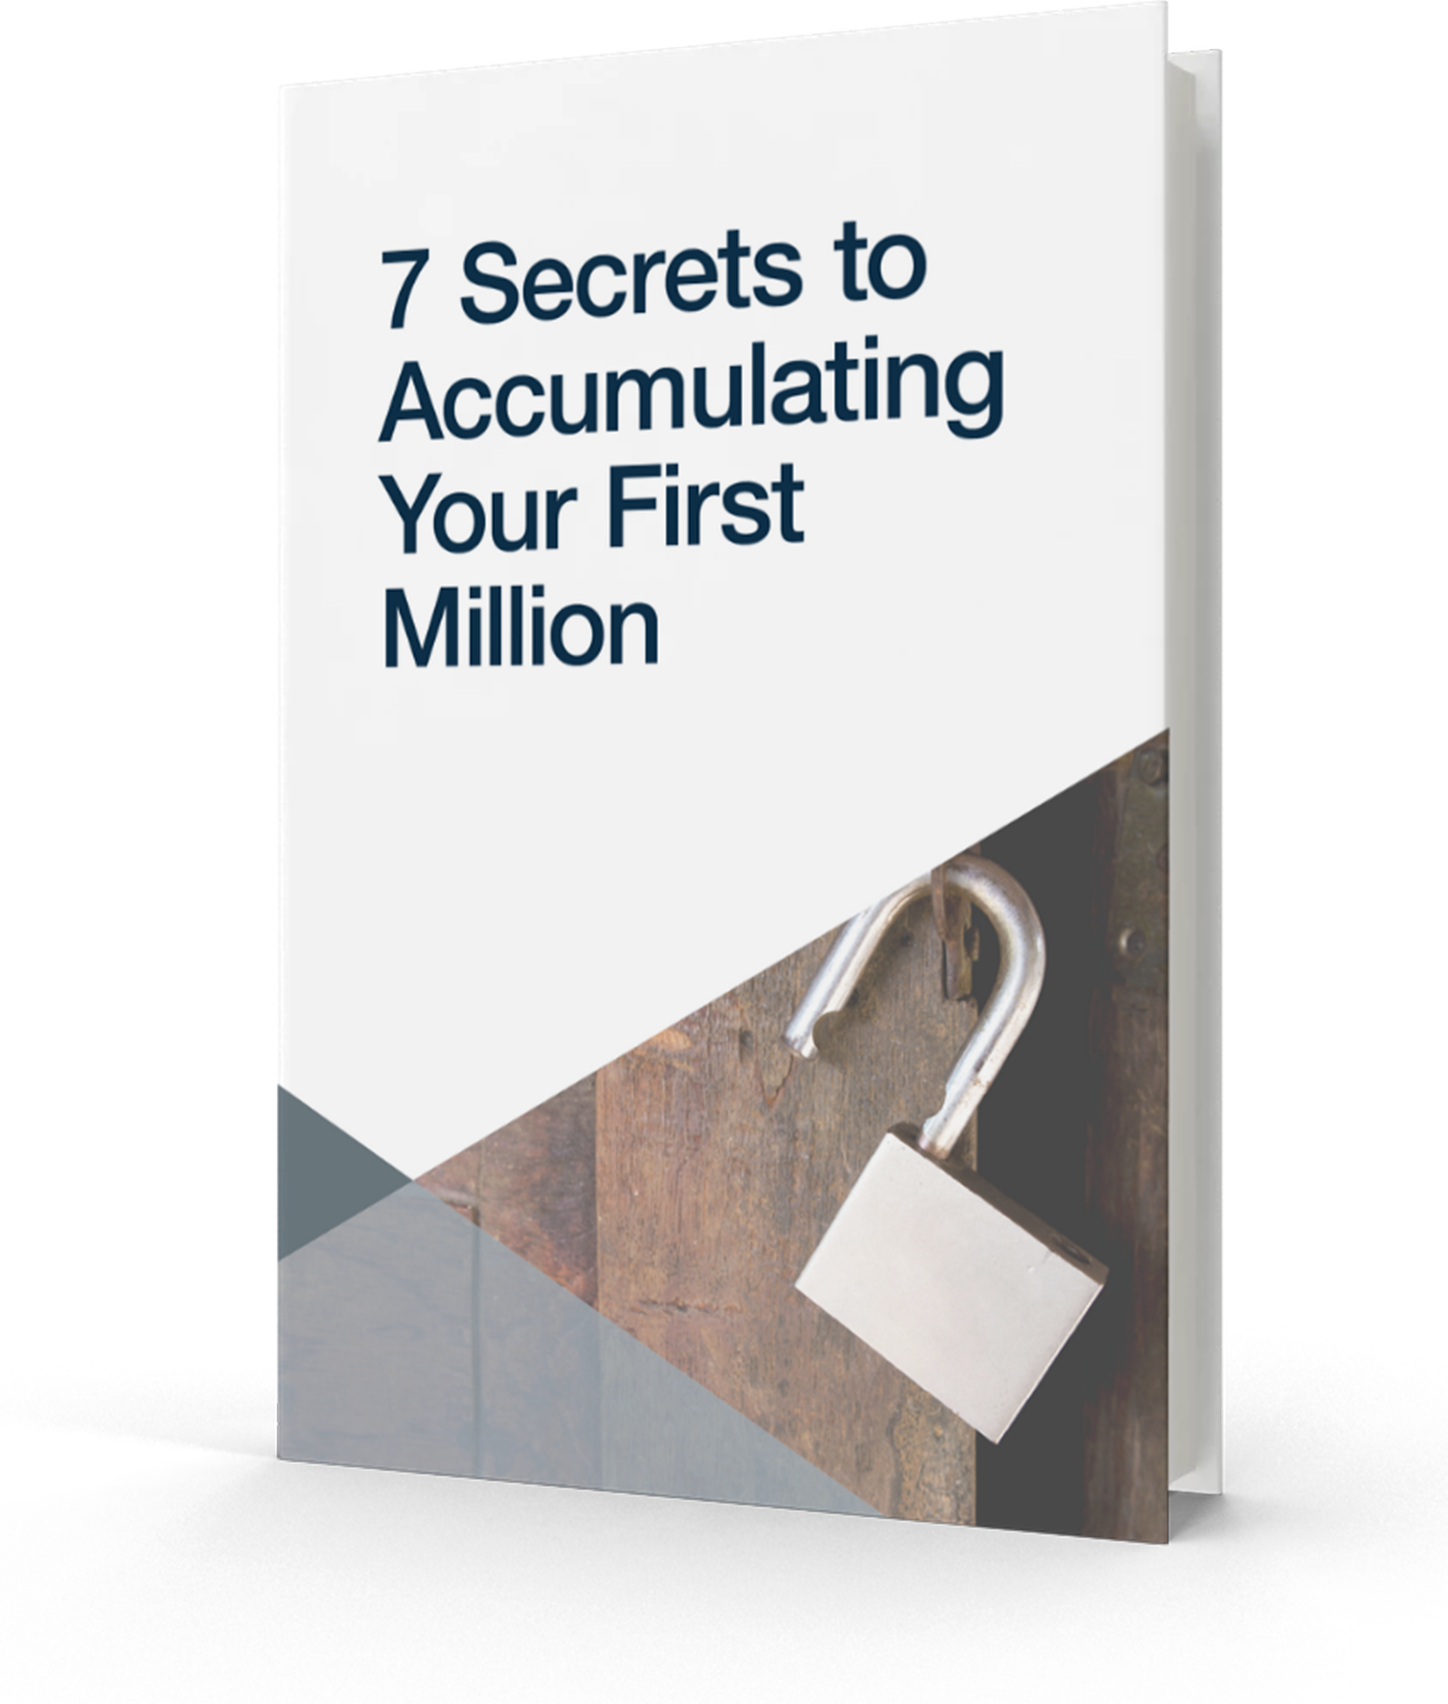 7 Secrets to Accumulating Your First Million